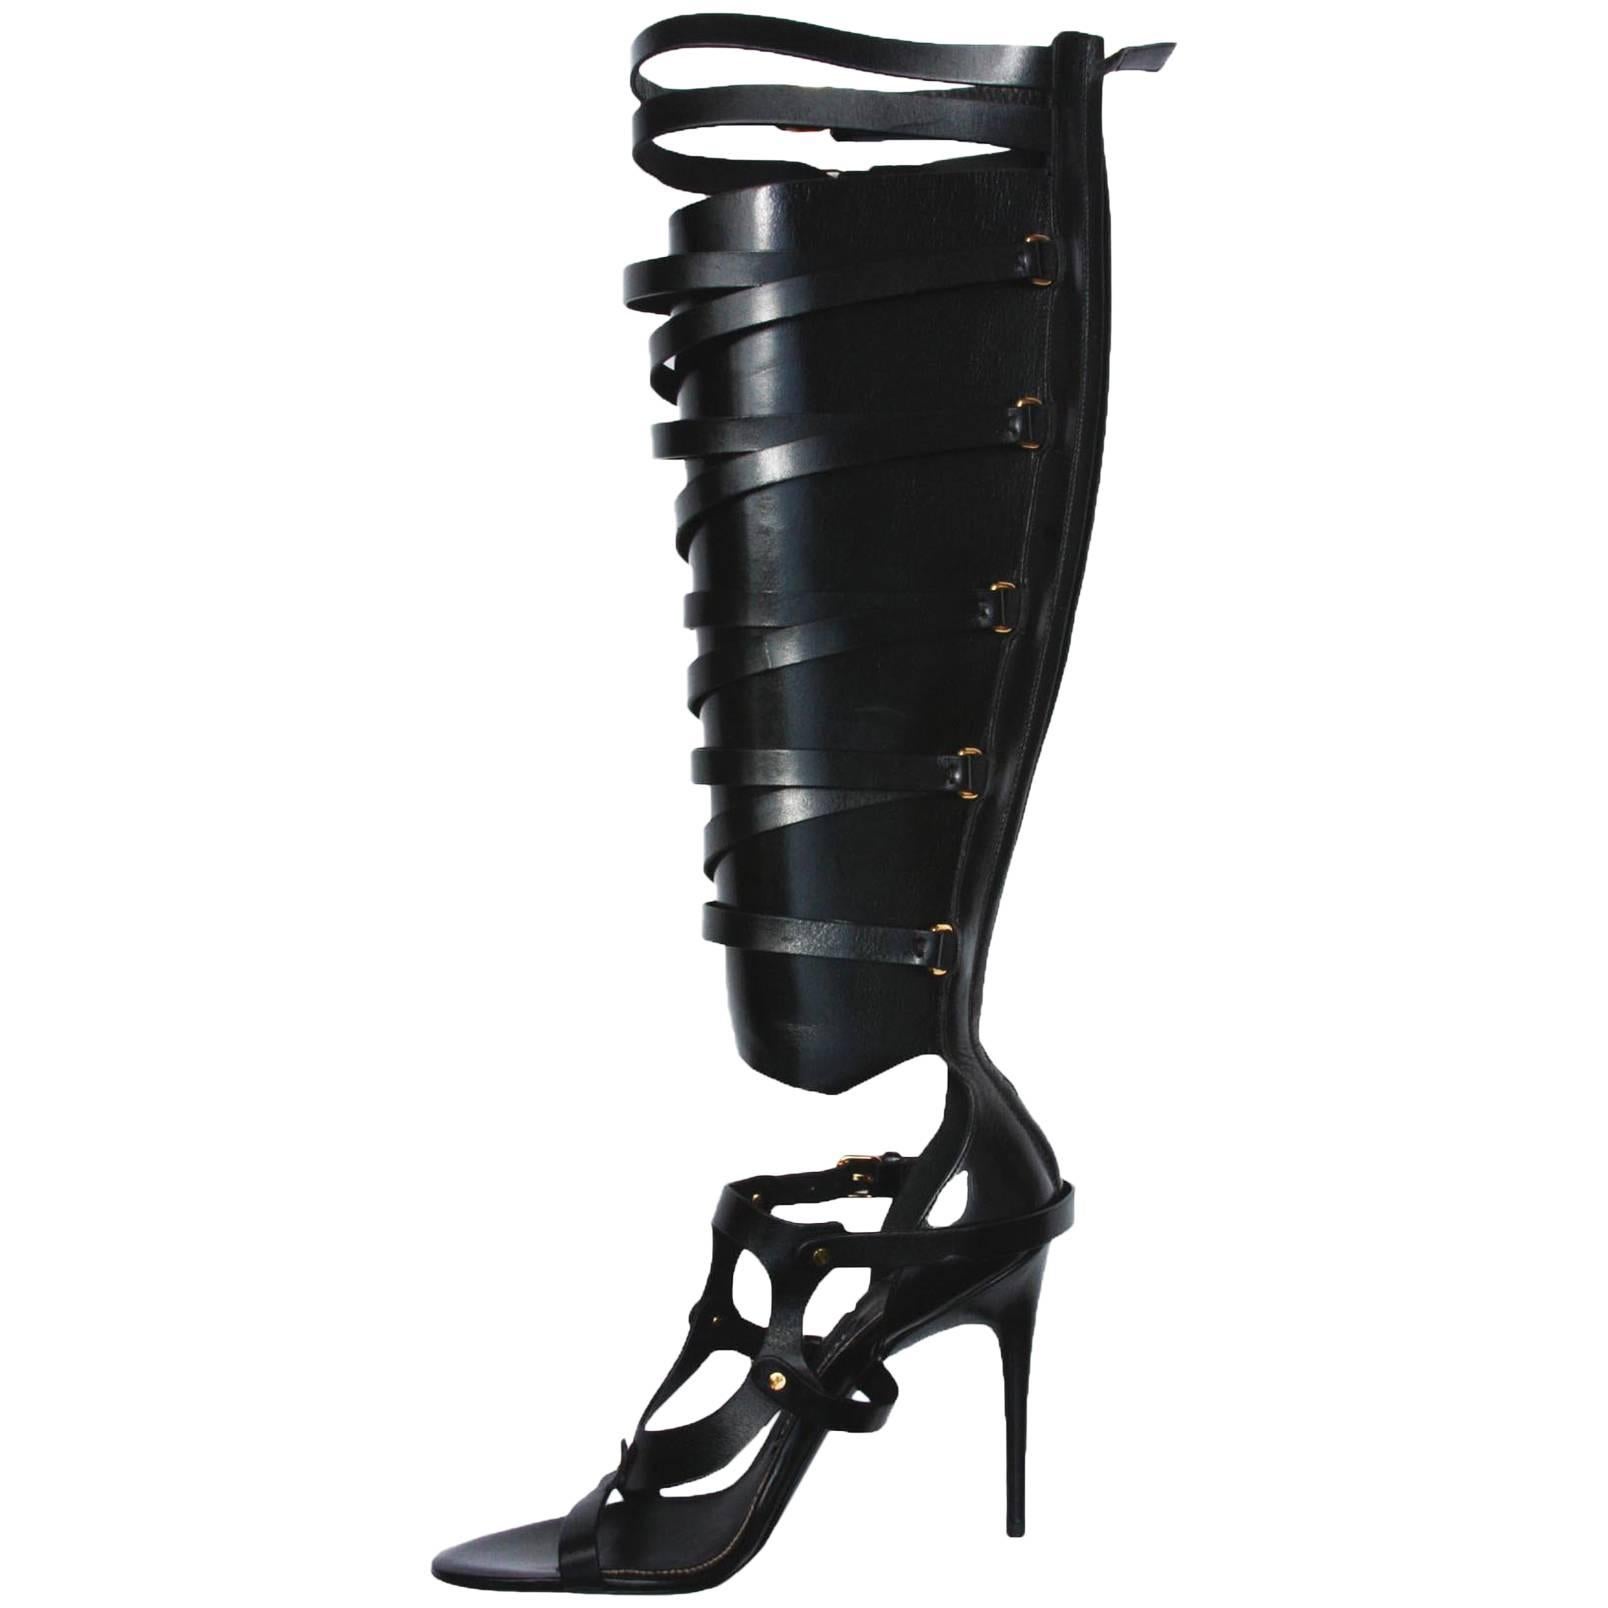 New TOM FORD Black Strappy Buckled Sandal Leather Gladiator Boots It. 39.5